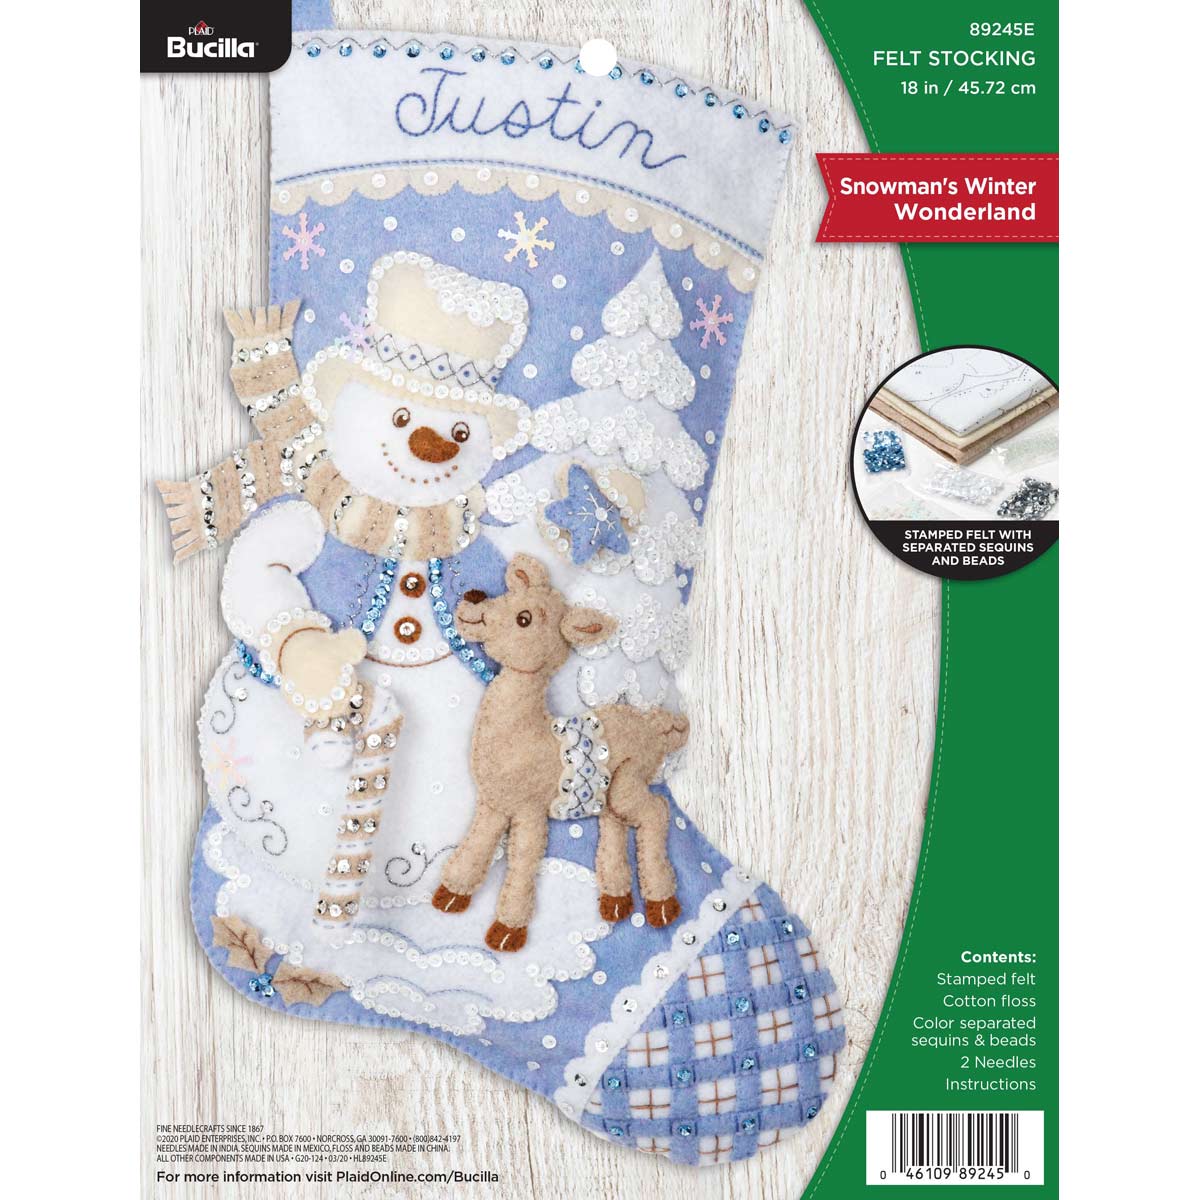 Buy Stocking Pattern Online In India -  India